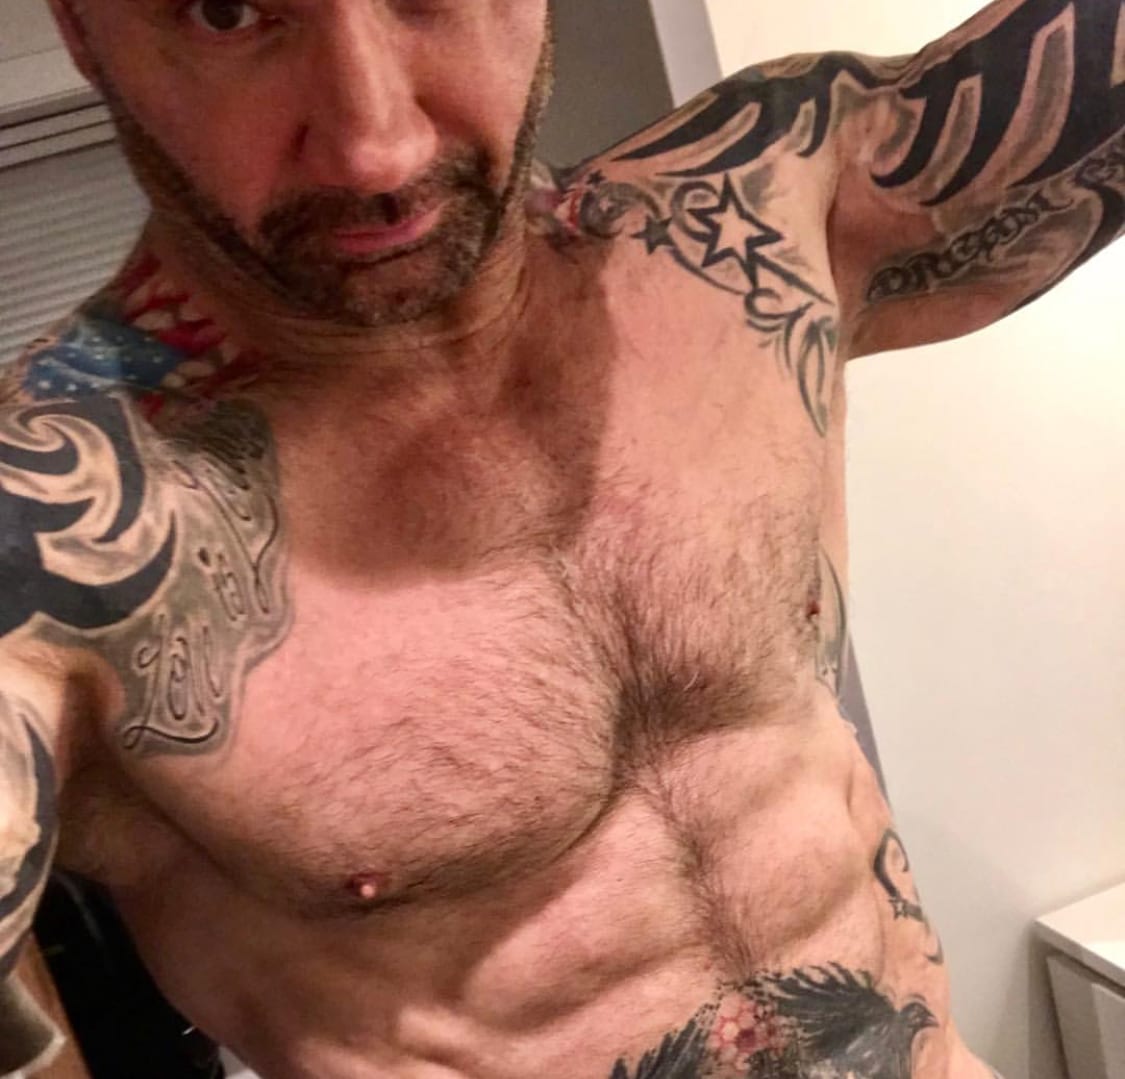 Batista Wishes A Happy Thanksgiving By Showing Off His Ripped Physique